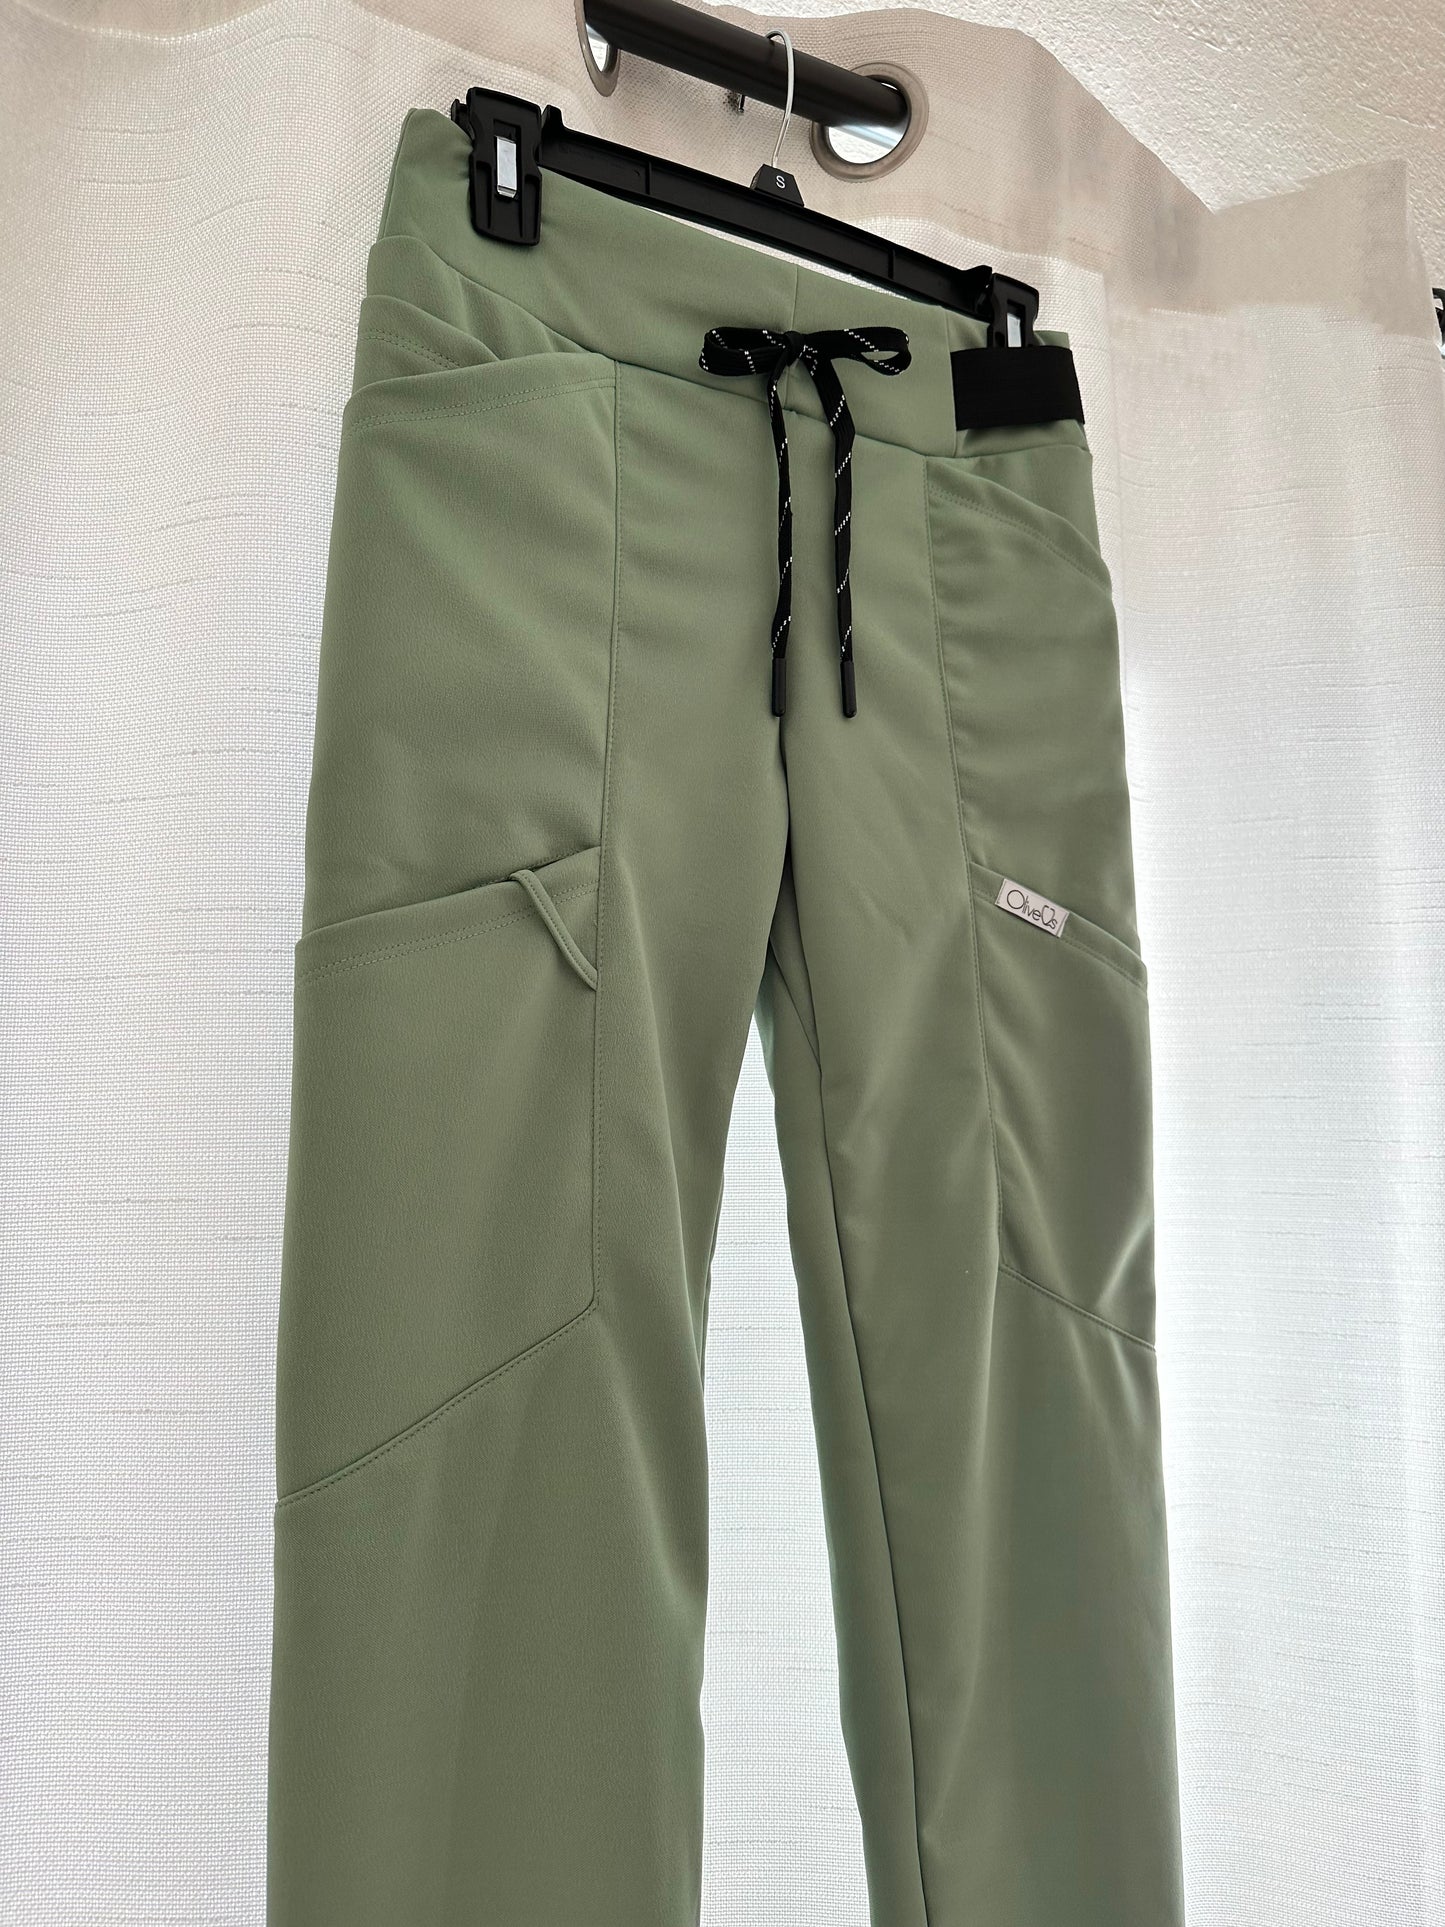 Women's Jogger Pants in Olive Green – OliveUs Apparel